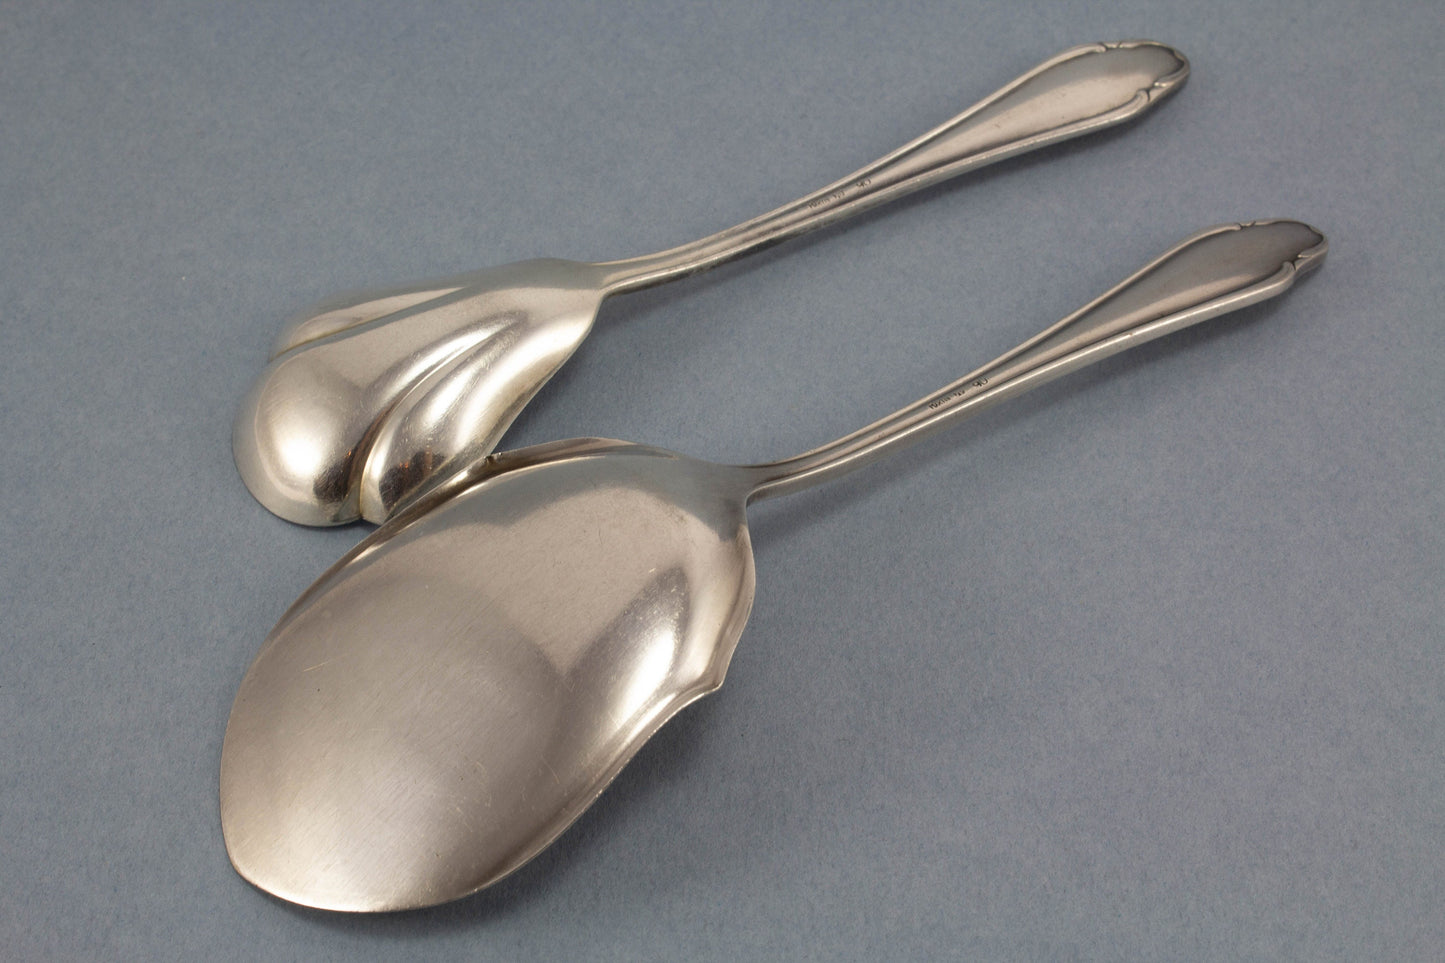 Small pastry server with matching spoon